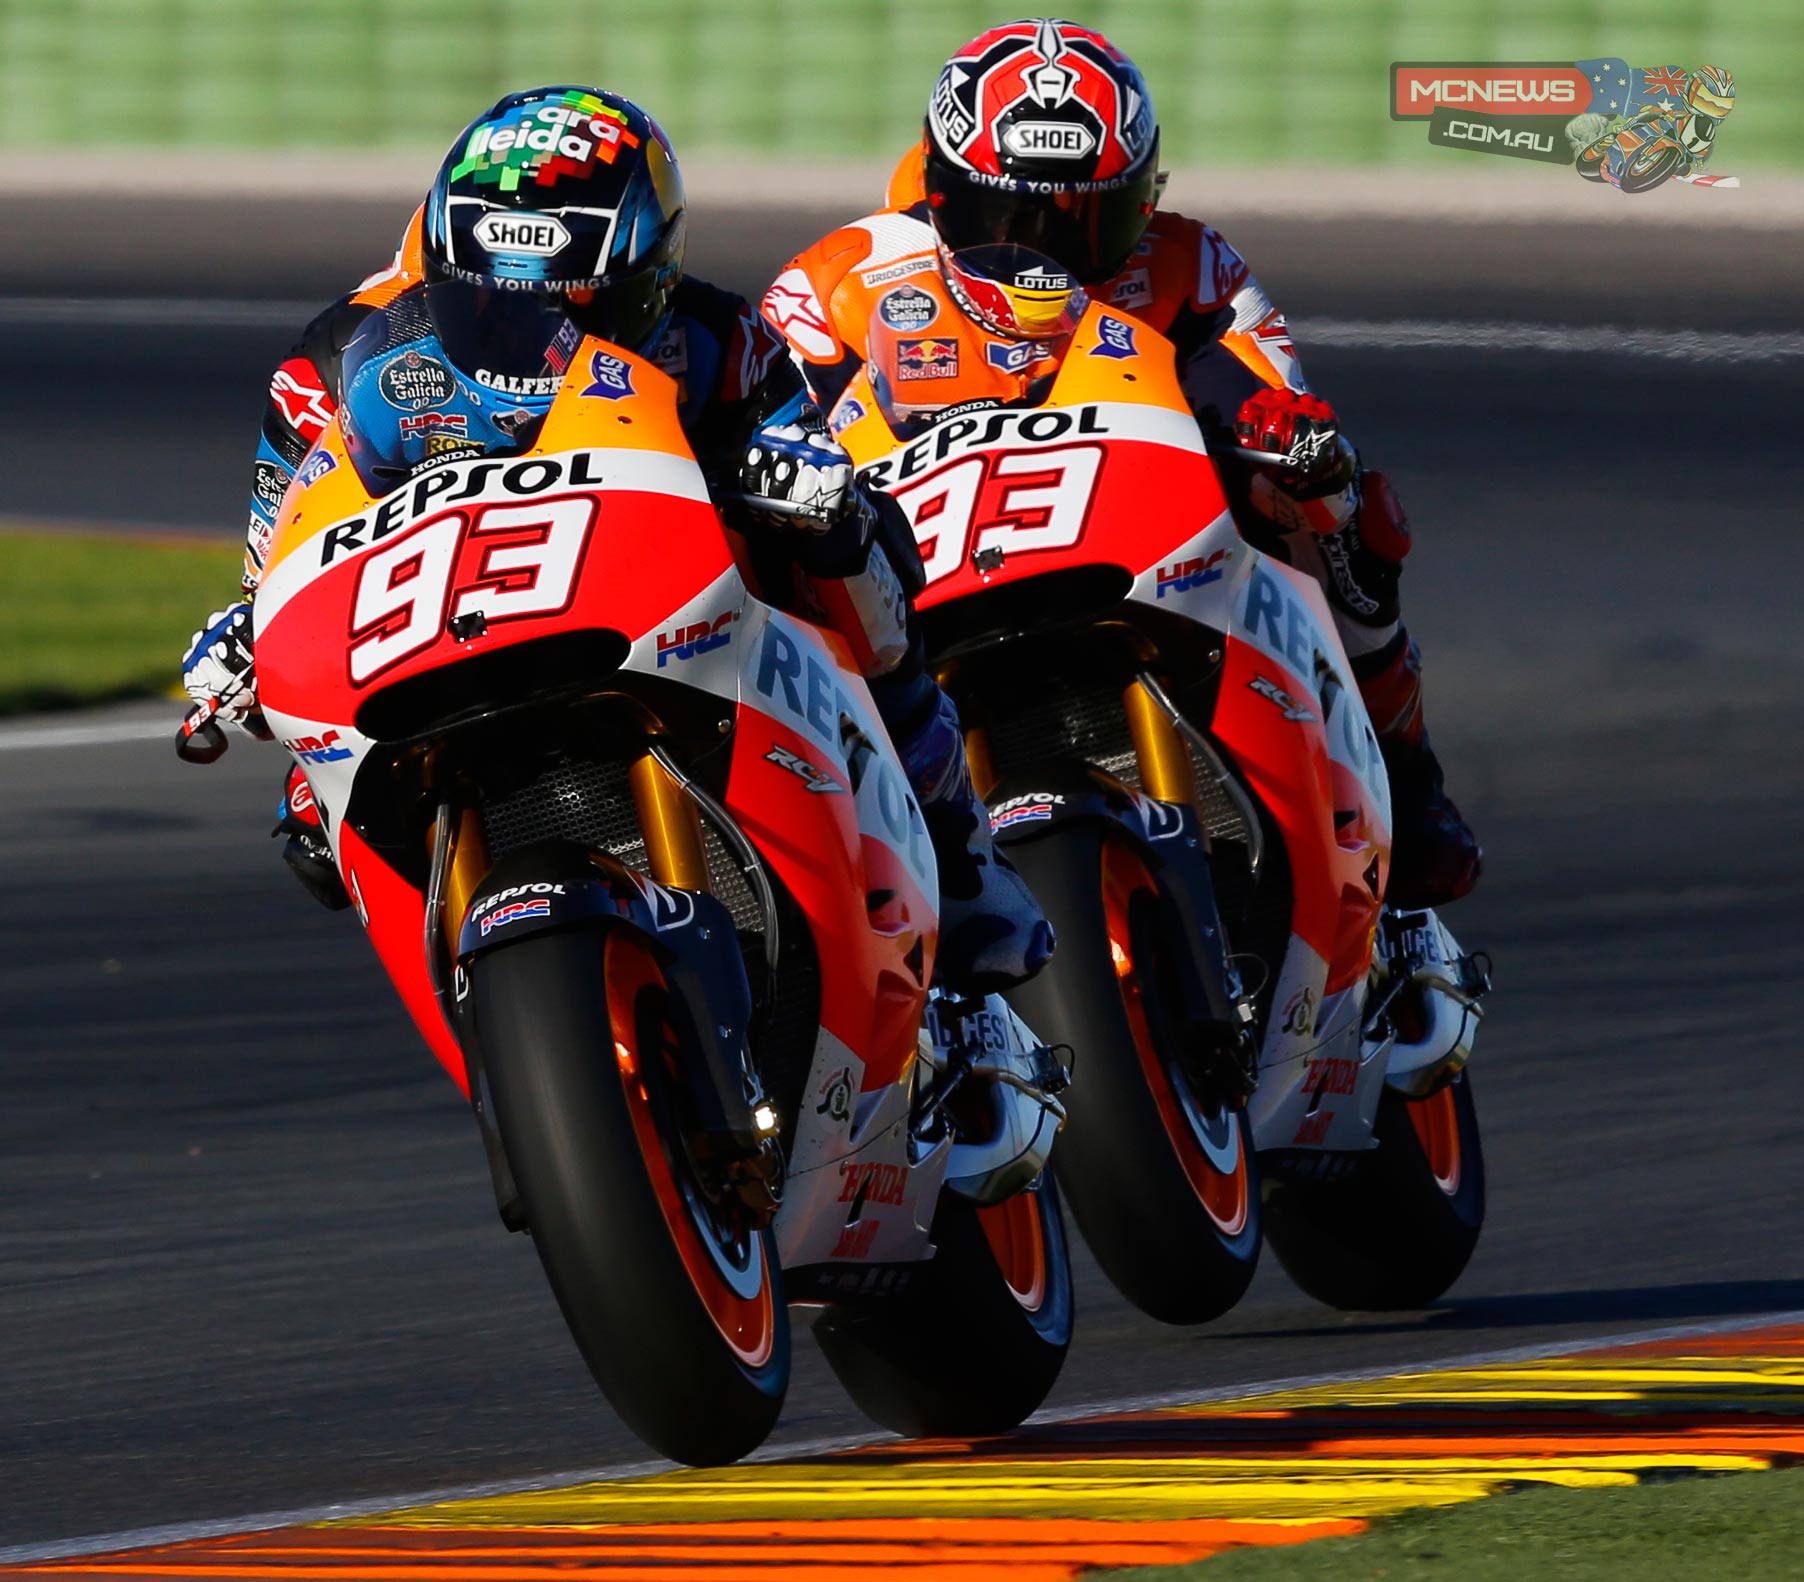 15 Motogp Testing Underway At Valencia Motorcycle News Sport And Reviews